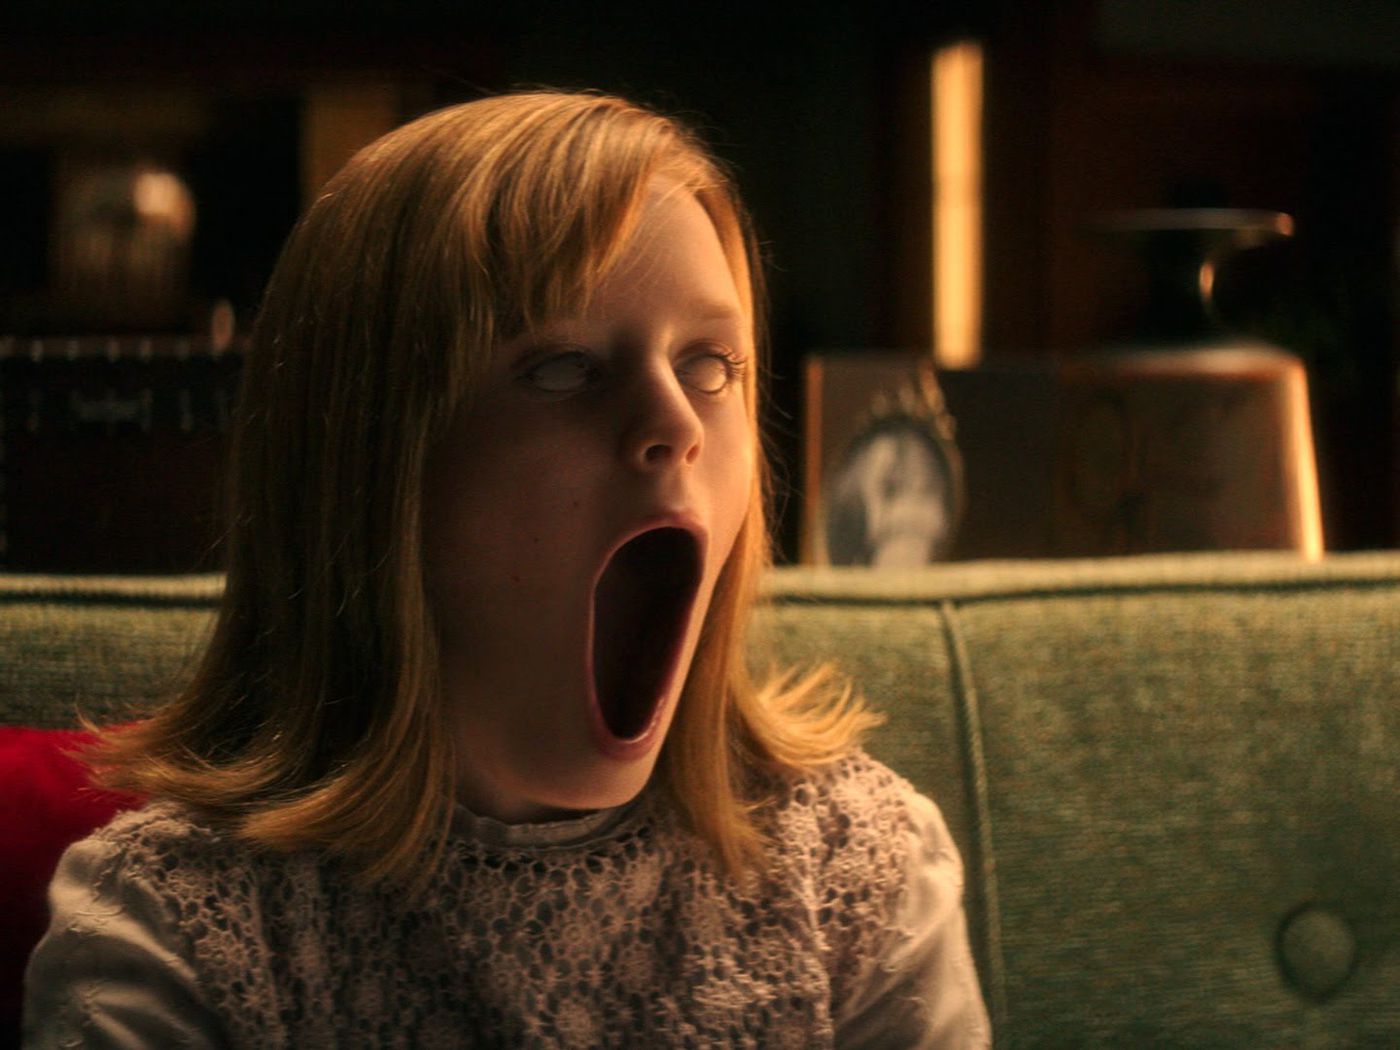 Ouija: Origin of Evil tries its best but fails to spell out a good time at the movies